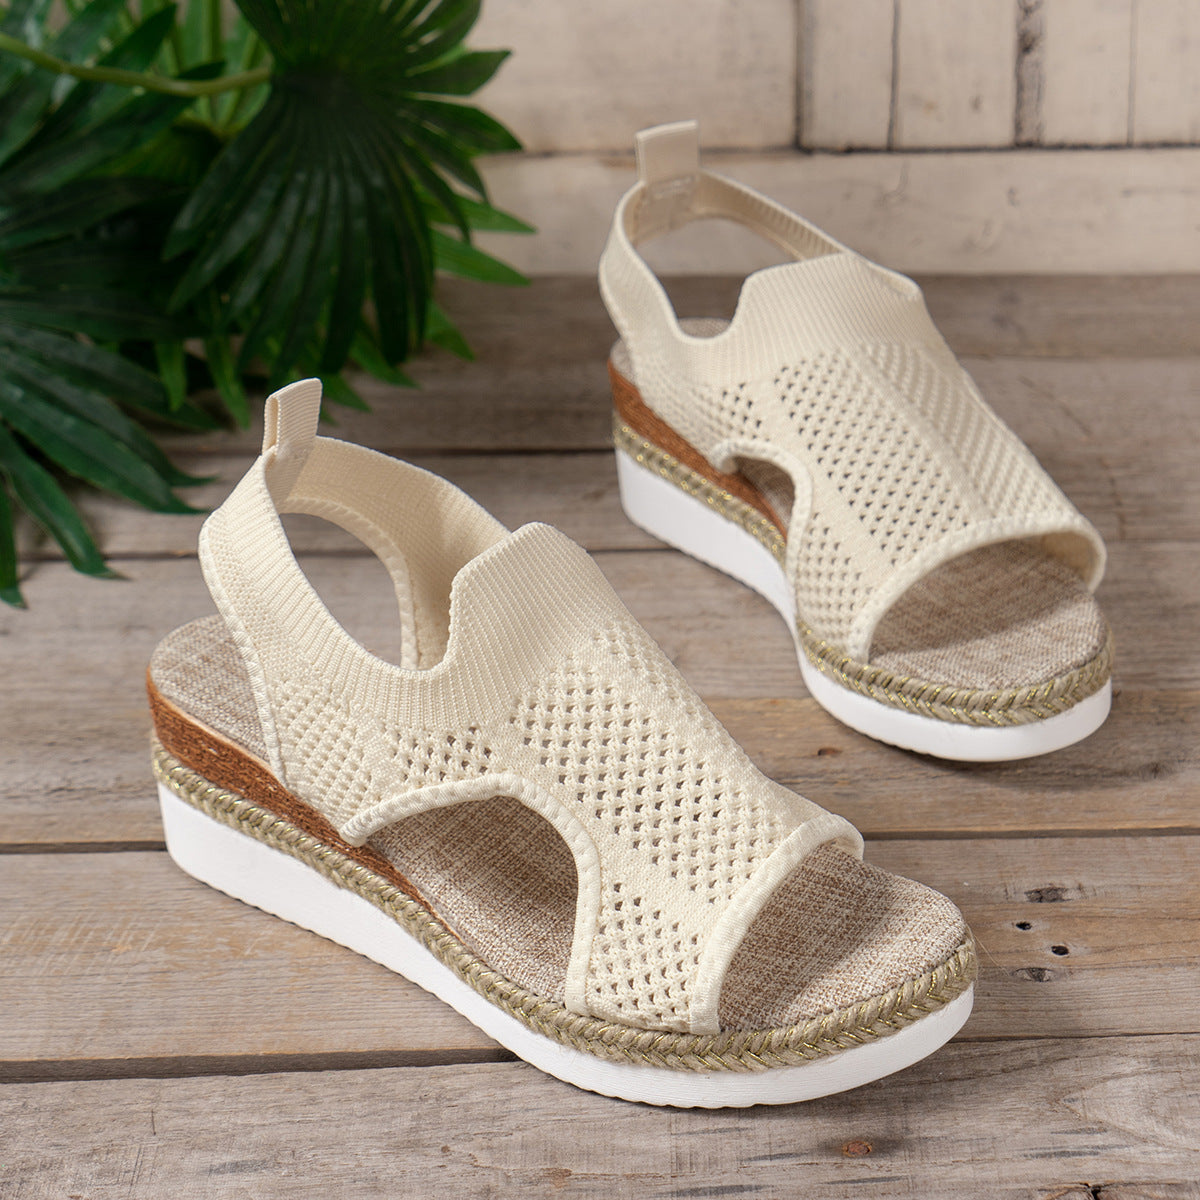 New Hollow Wedges Sandals Summer Fly Woven Breathable Mesh Shoes For Women Peep-Toe Sandals